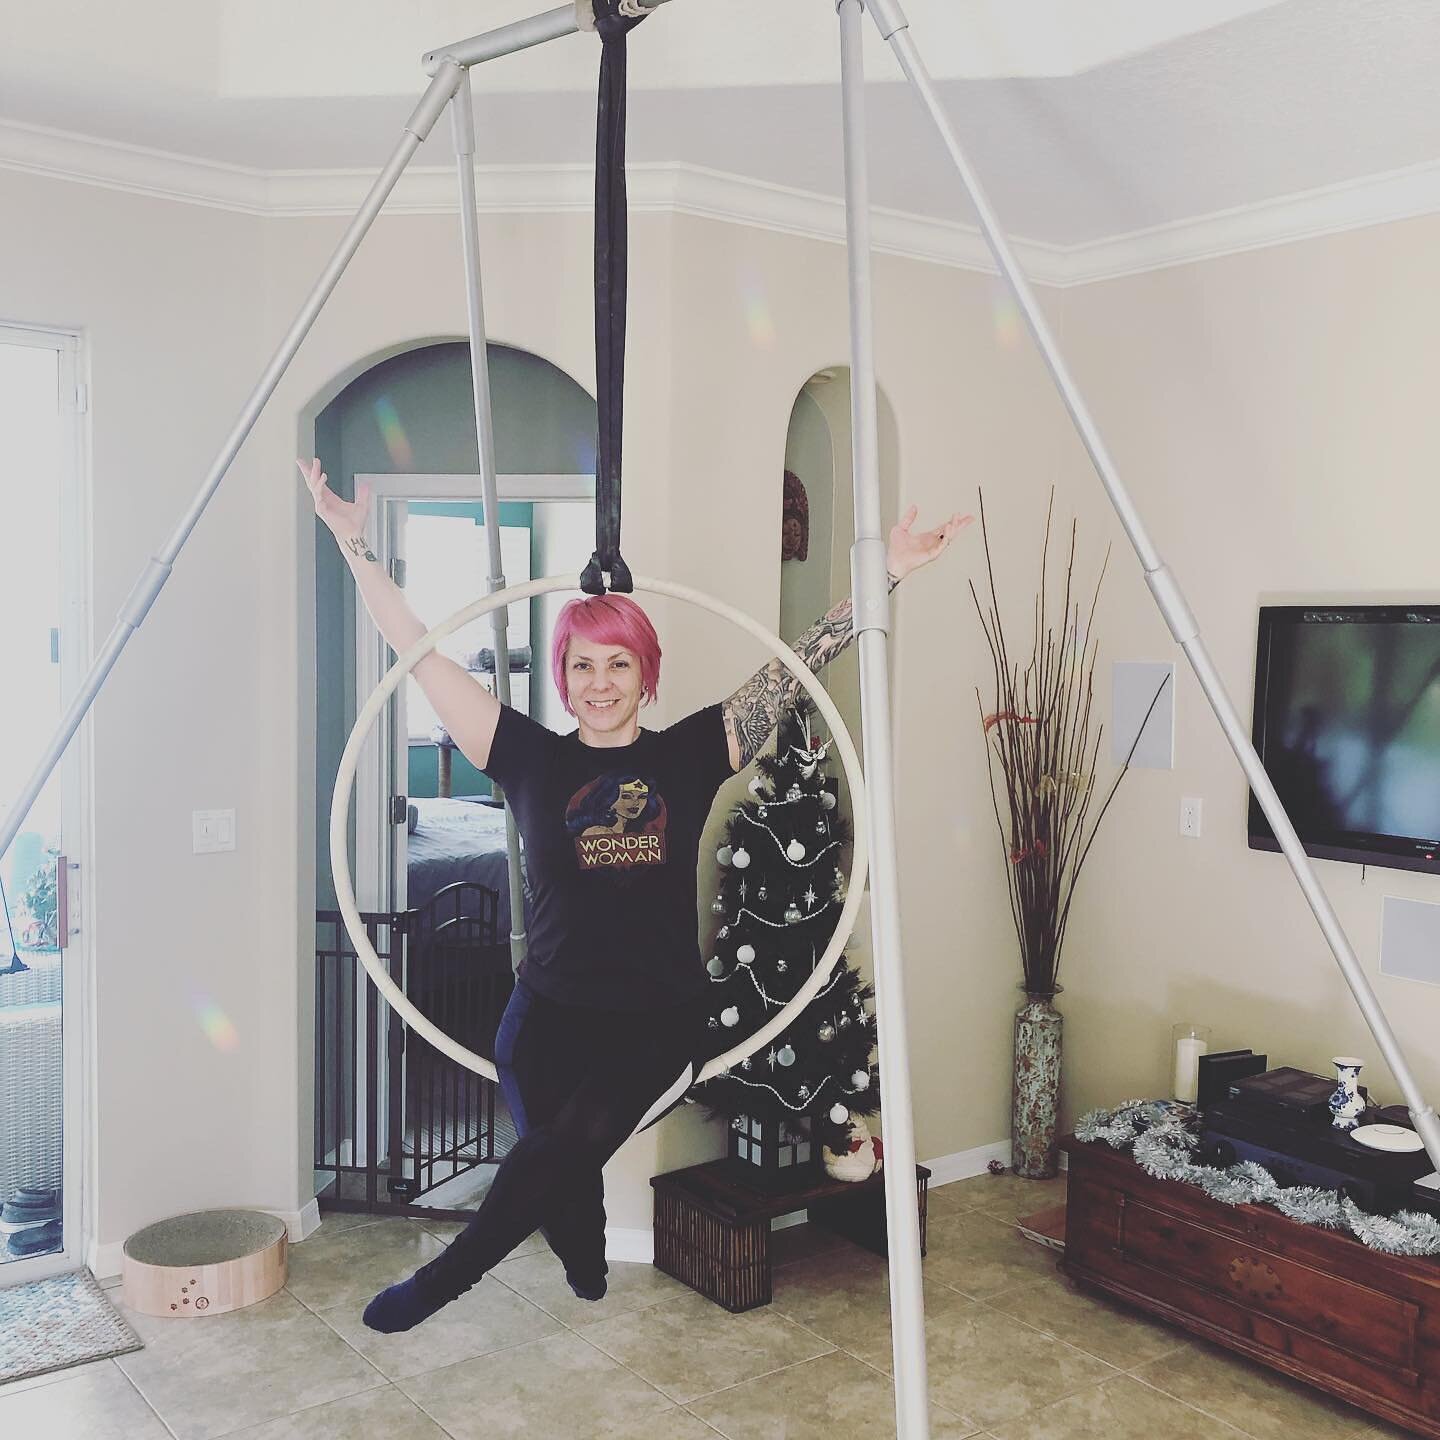 #mini #rig in!!
ASCENT is now even more versatile as we can accommodate more venues with our shorty rig!!
Even our rigger aka my hubs @benegonzales is excited about it!!
. 
#aerial #aerialdance #lyra #performance #aerialhoop #orlandoaerialist #silks 